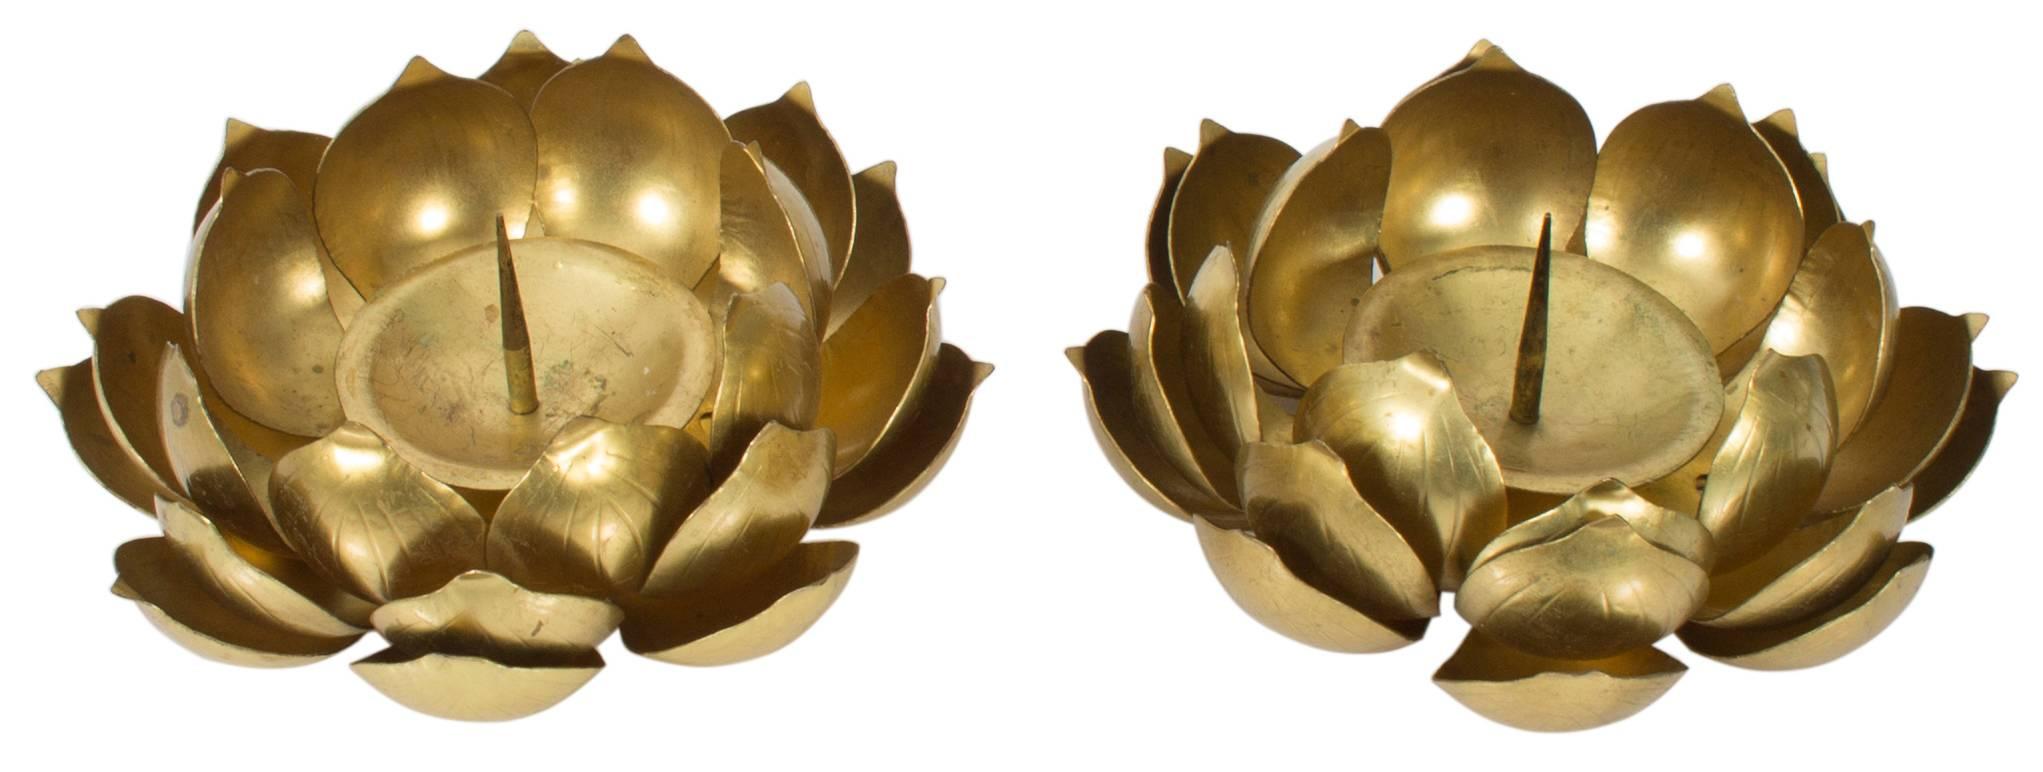 Set of three brass lotus flower candleholders. Solid brass with overall unpolished patina. Smaller flowers measure 5.5